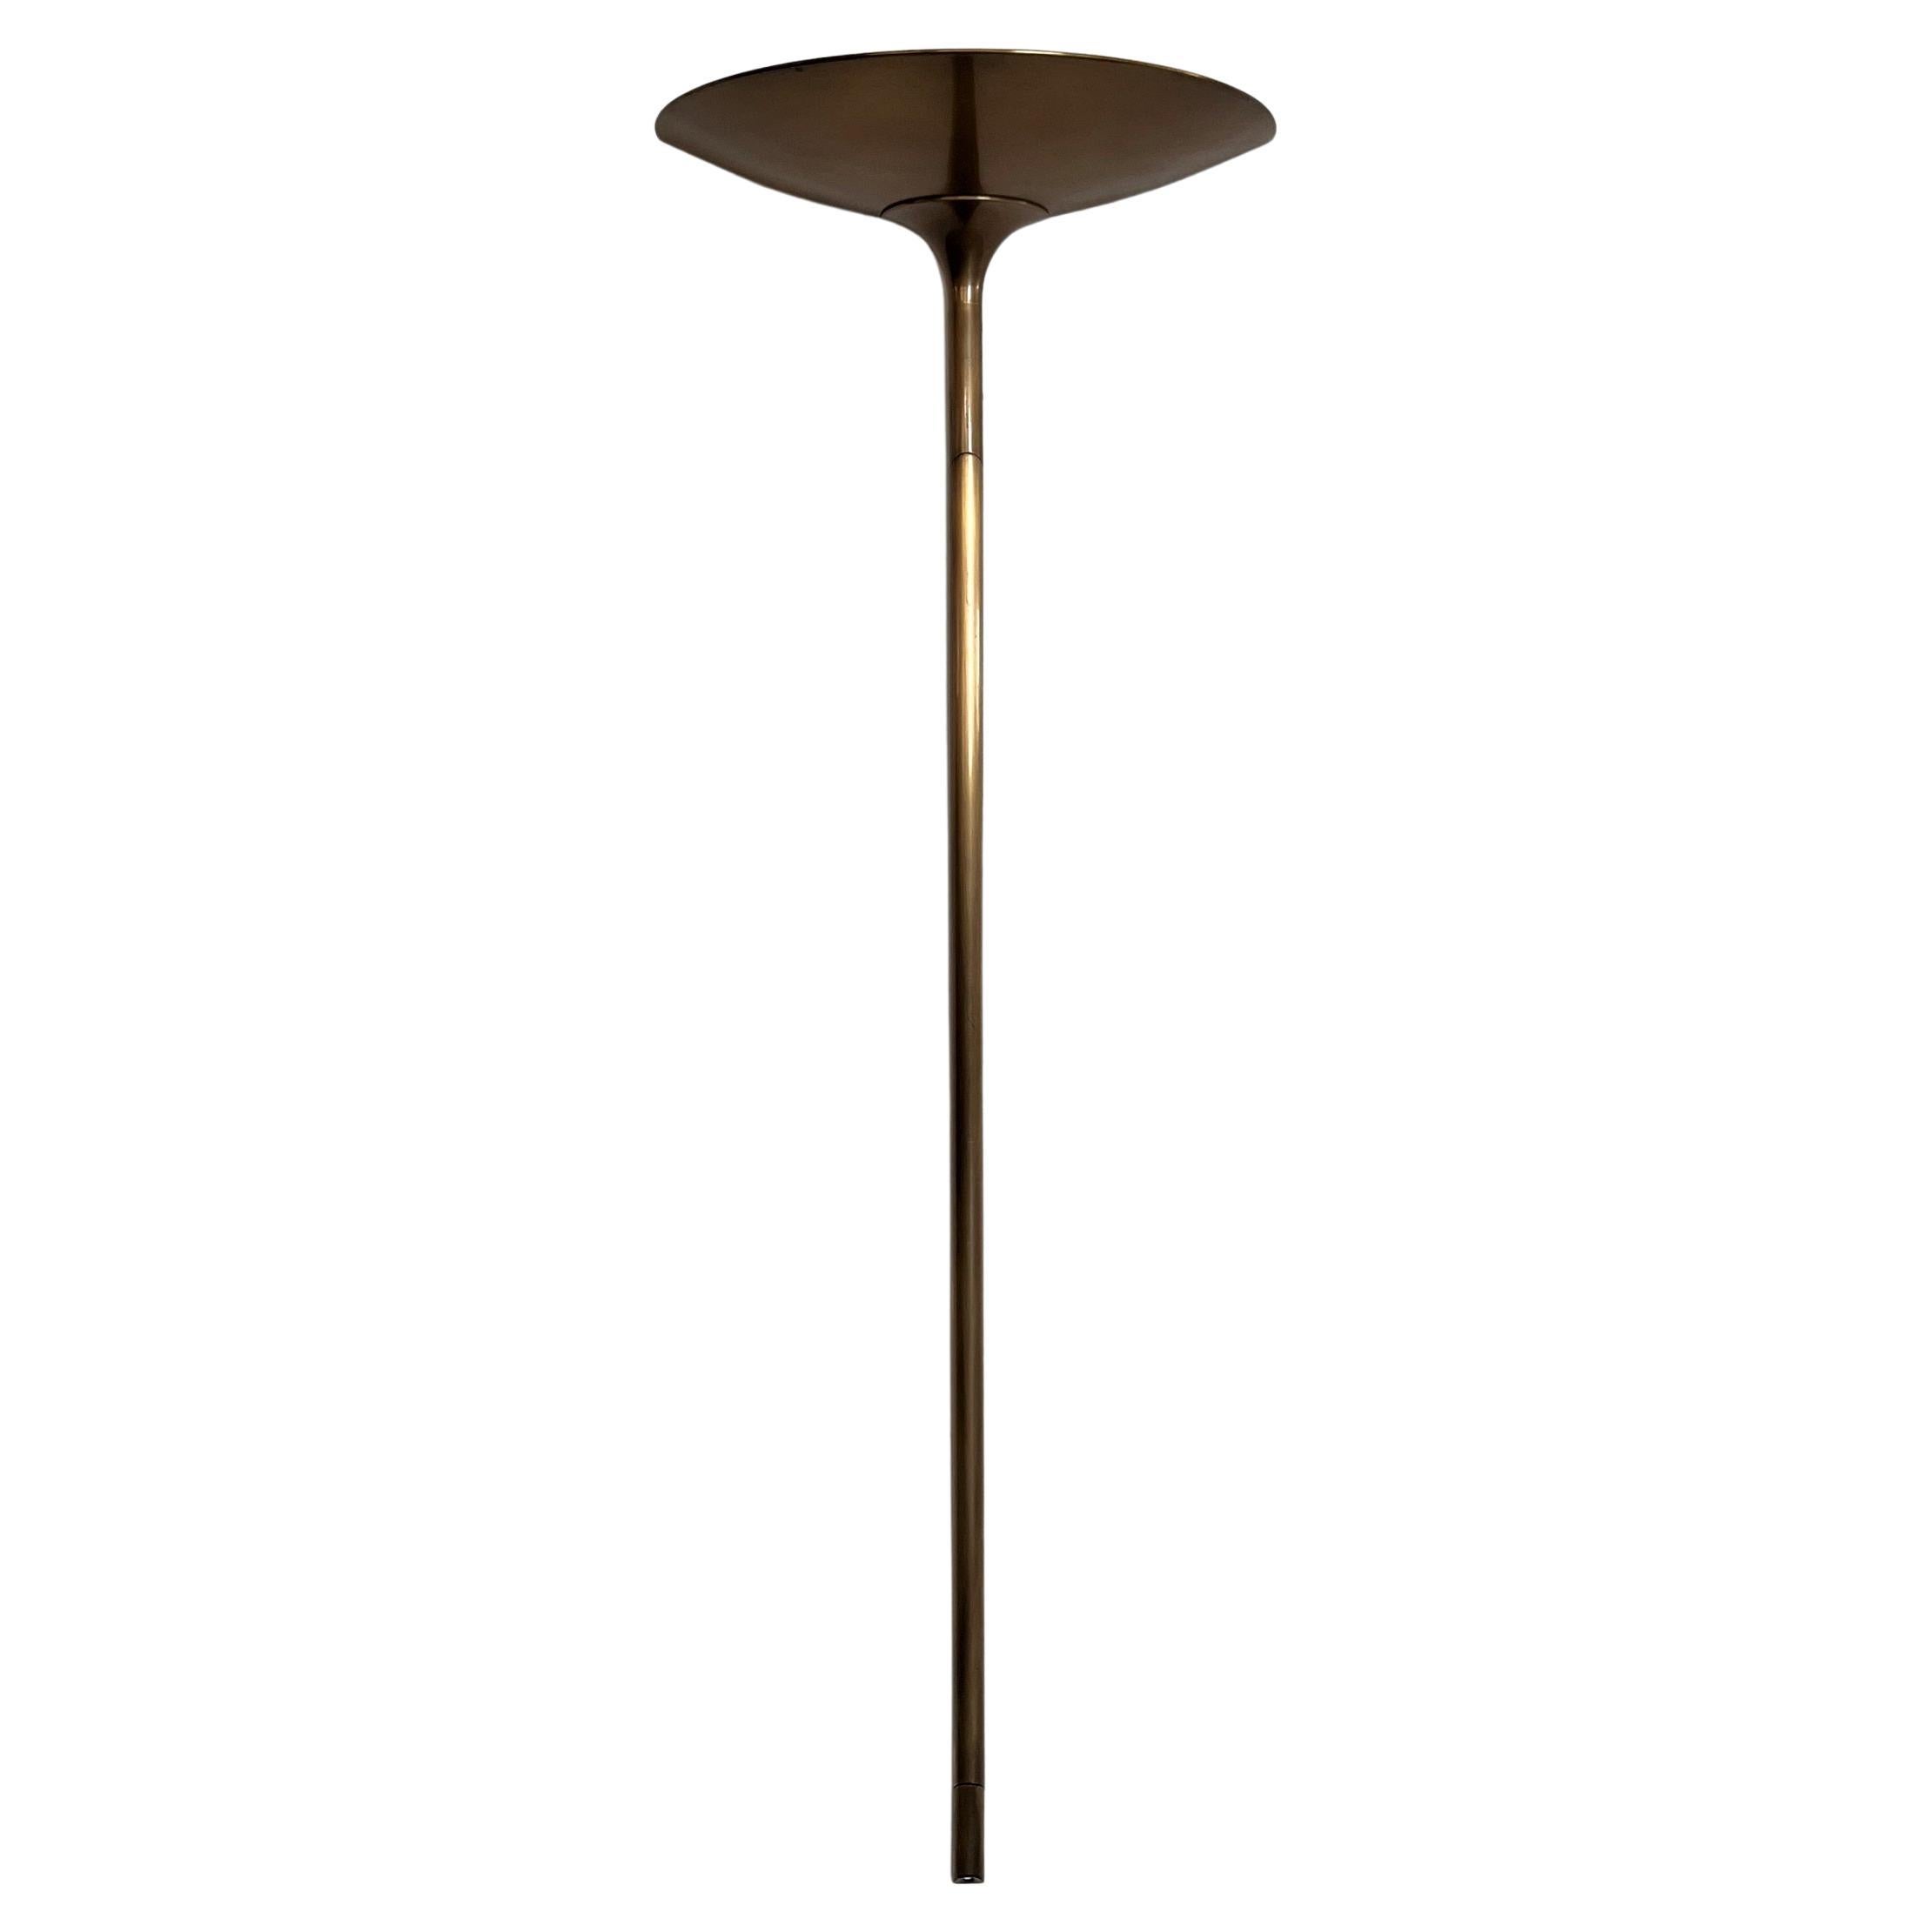 Florian Schulz Vintage Wall Sconce in Brushed Brass, 1970s For Sale